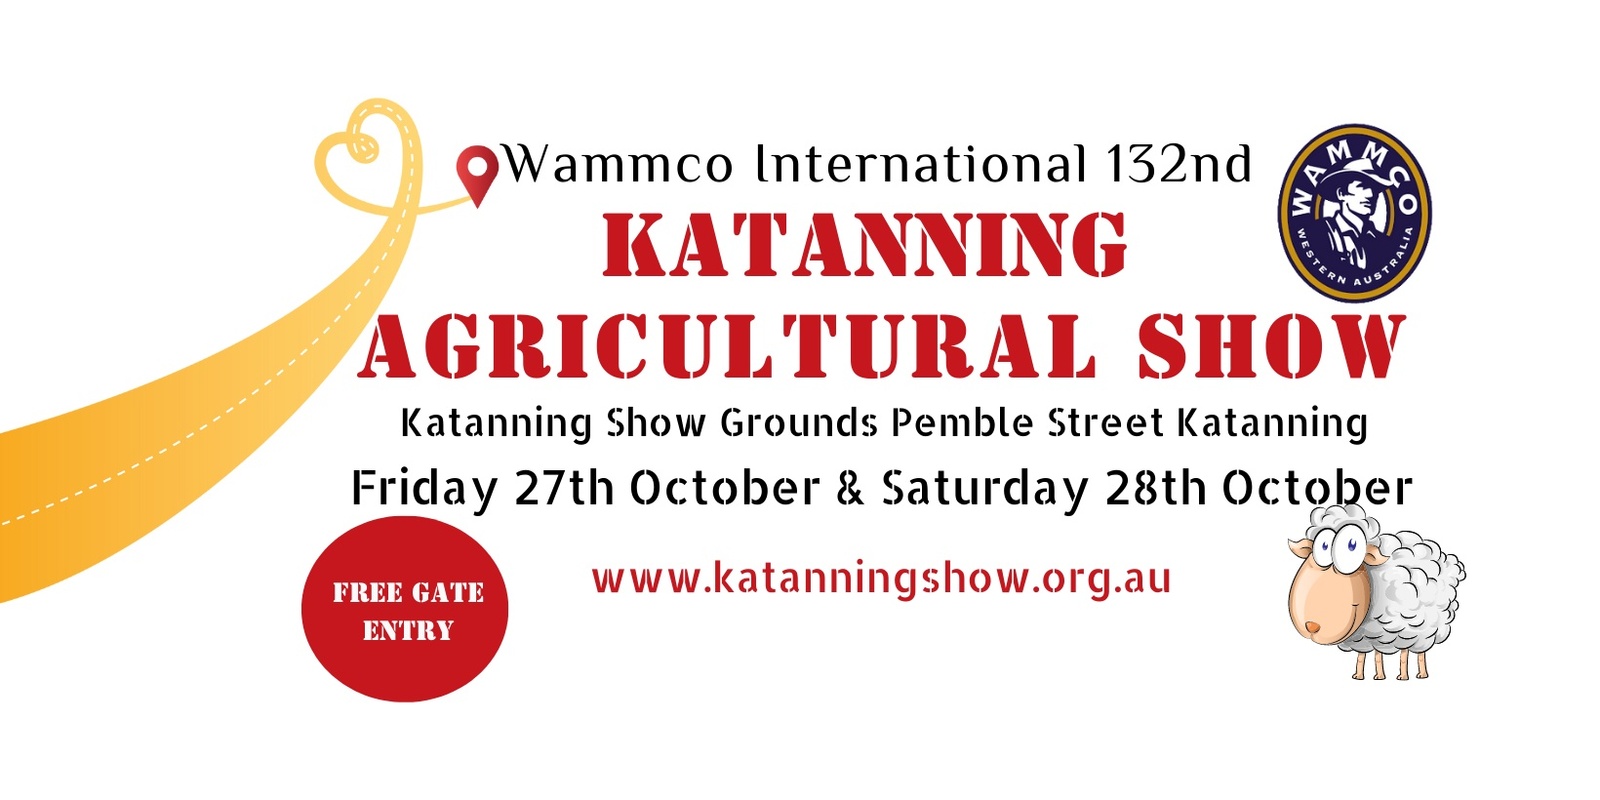 Banner image for Wammco International 132nd Katanning Agricultural Show